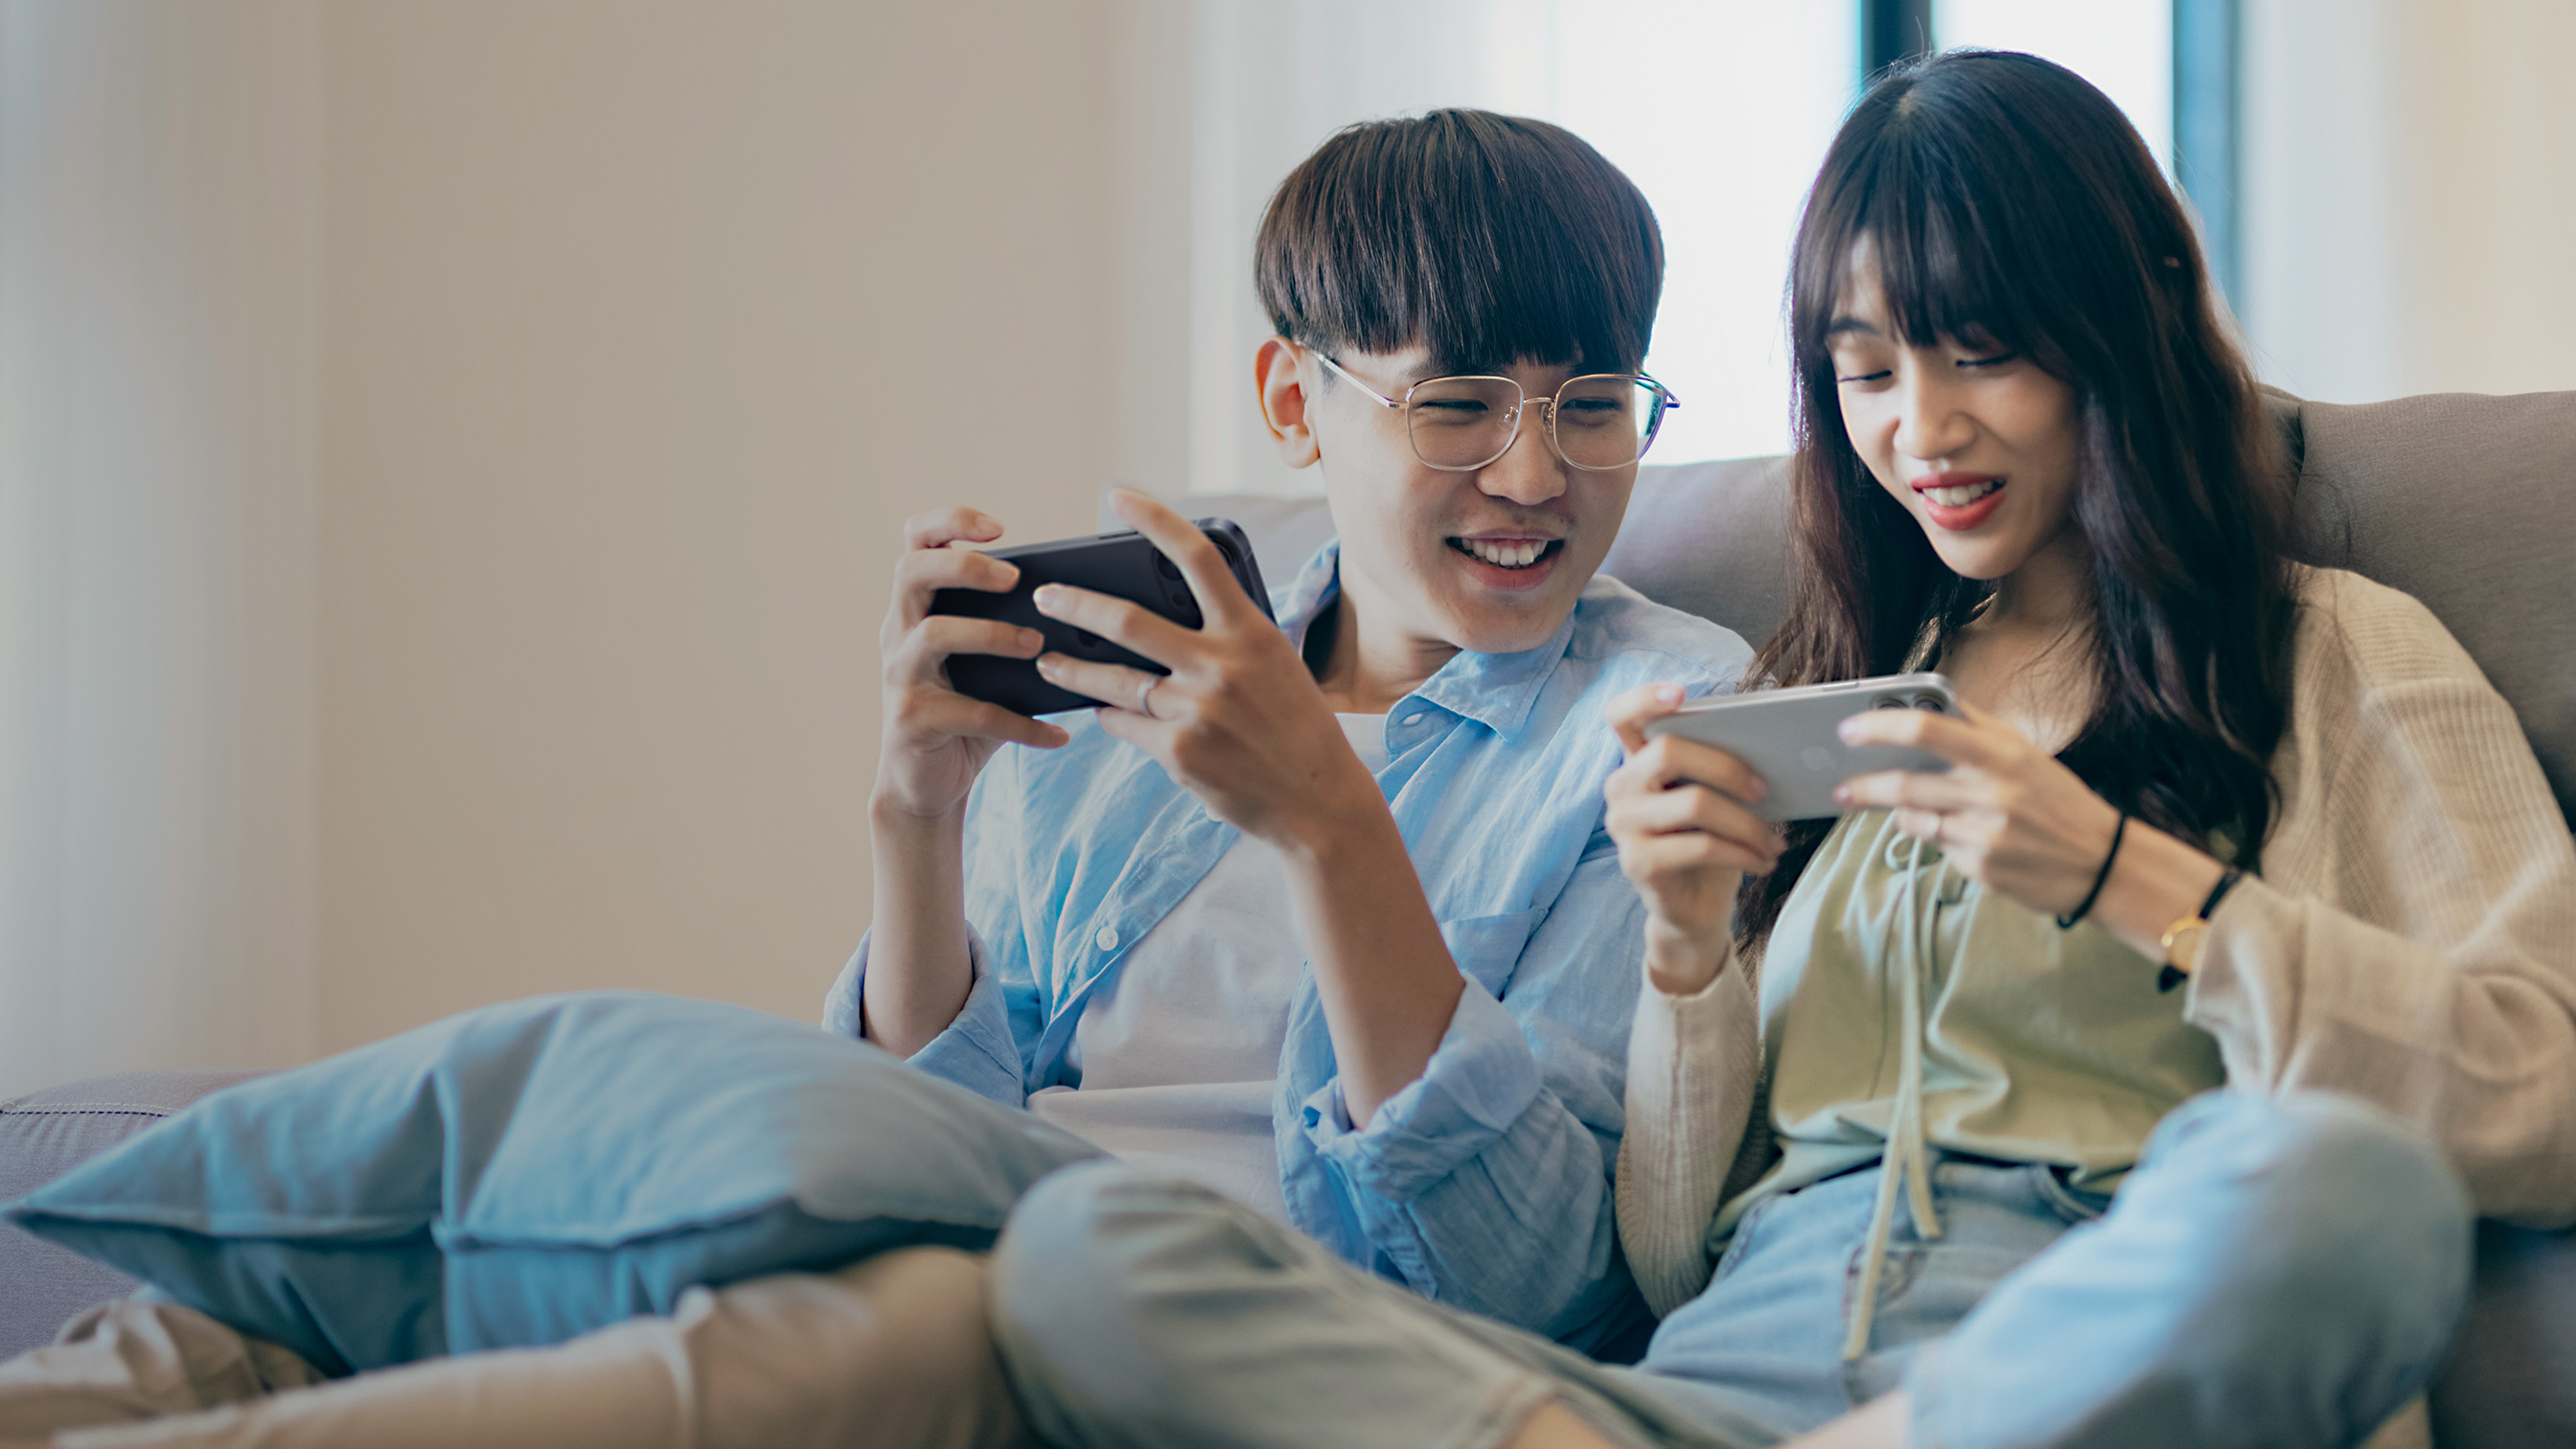 Two people sitting on a couch playing games on their iPhones.